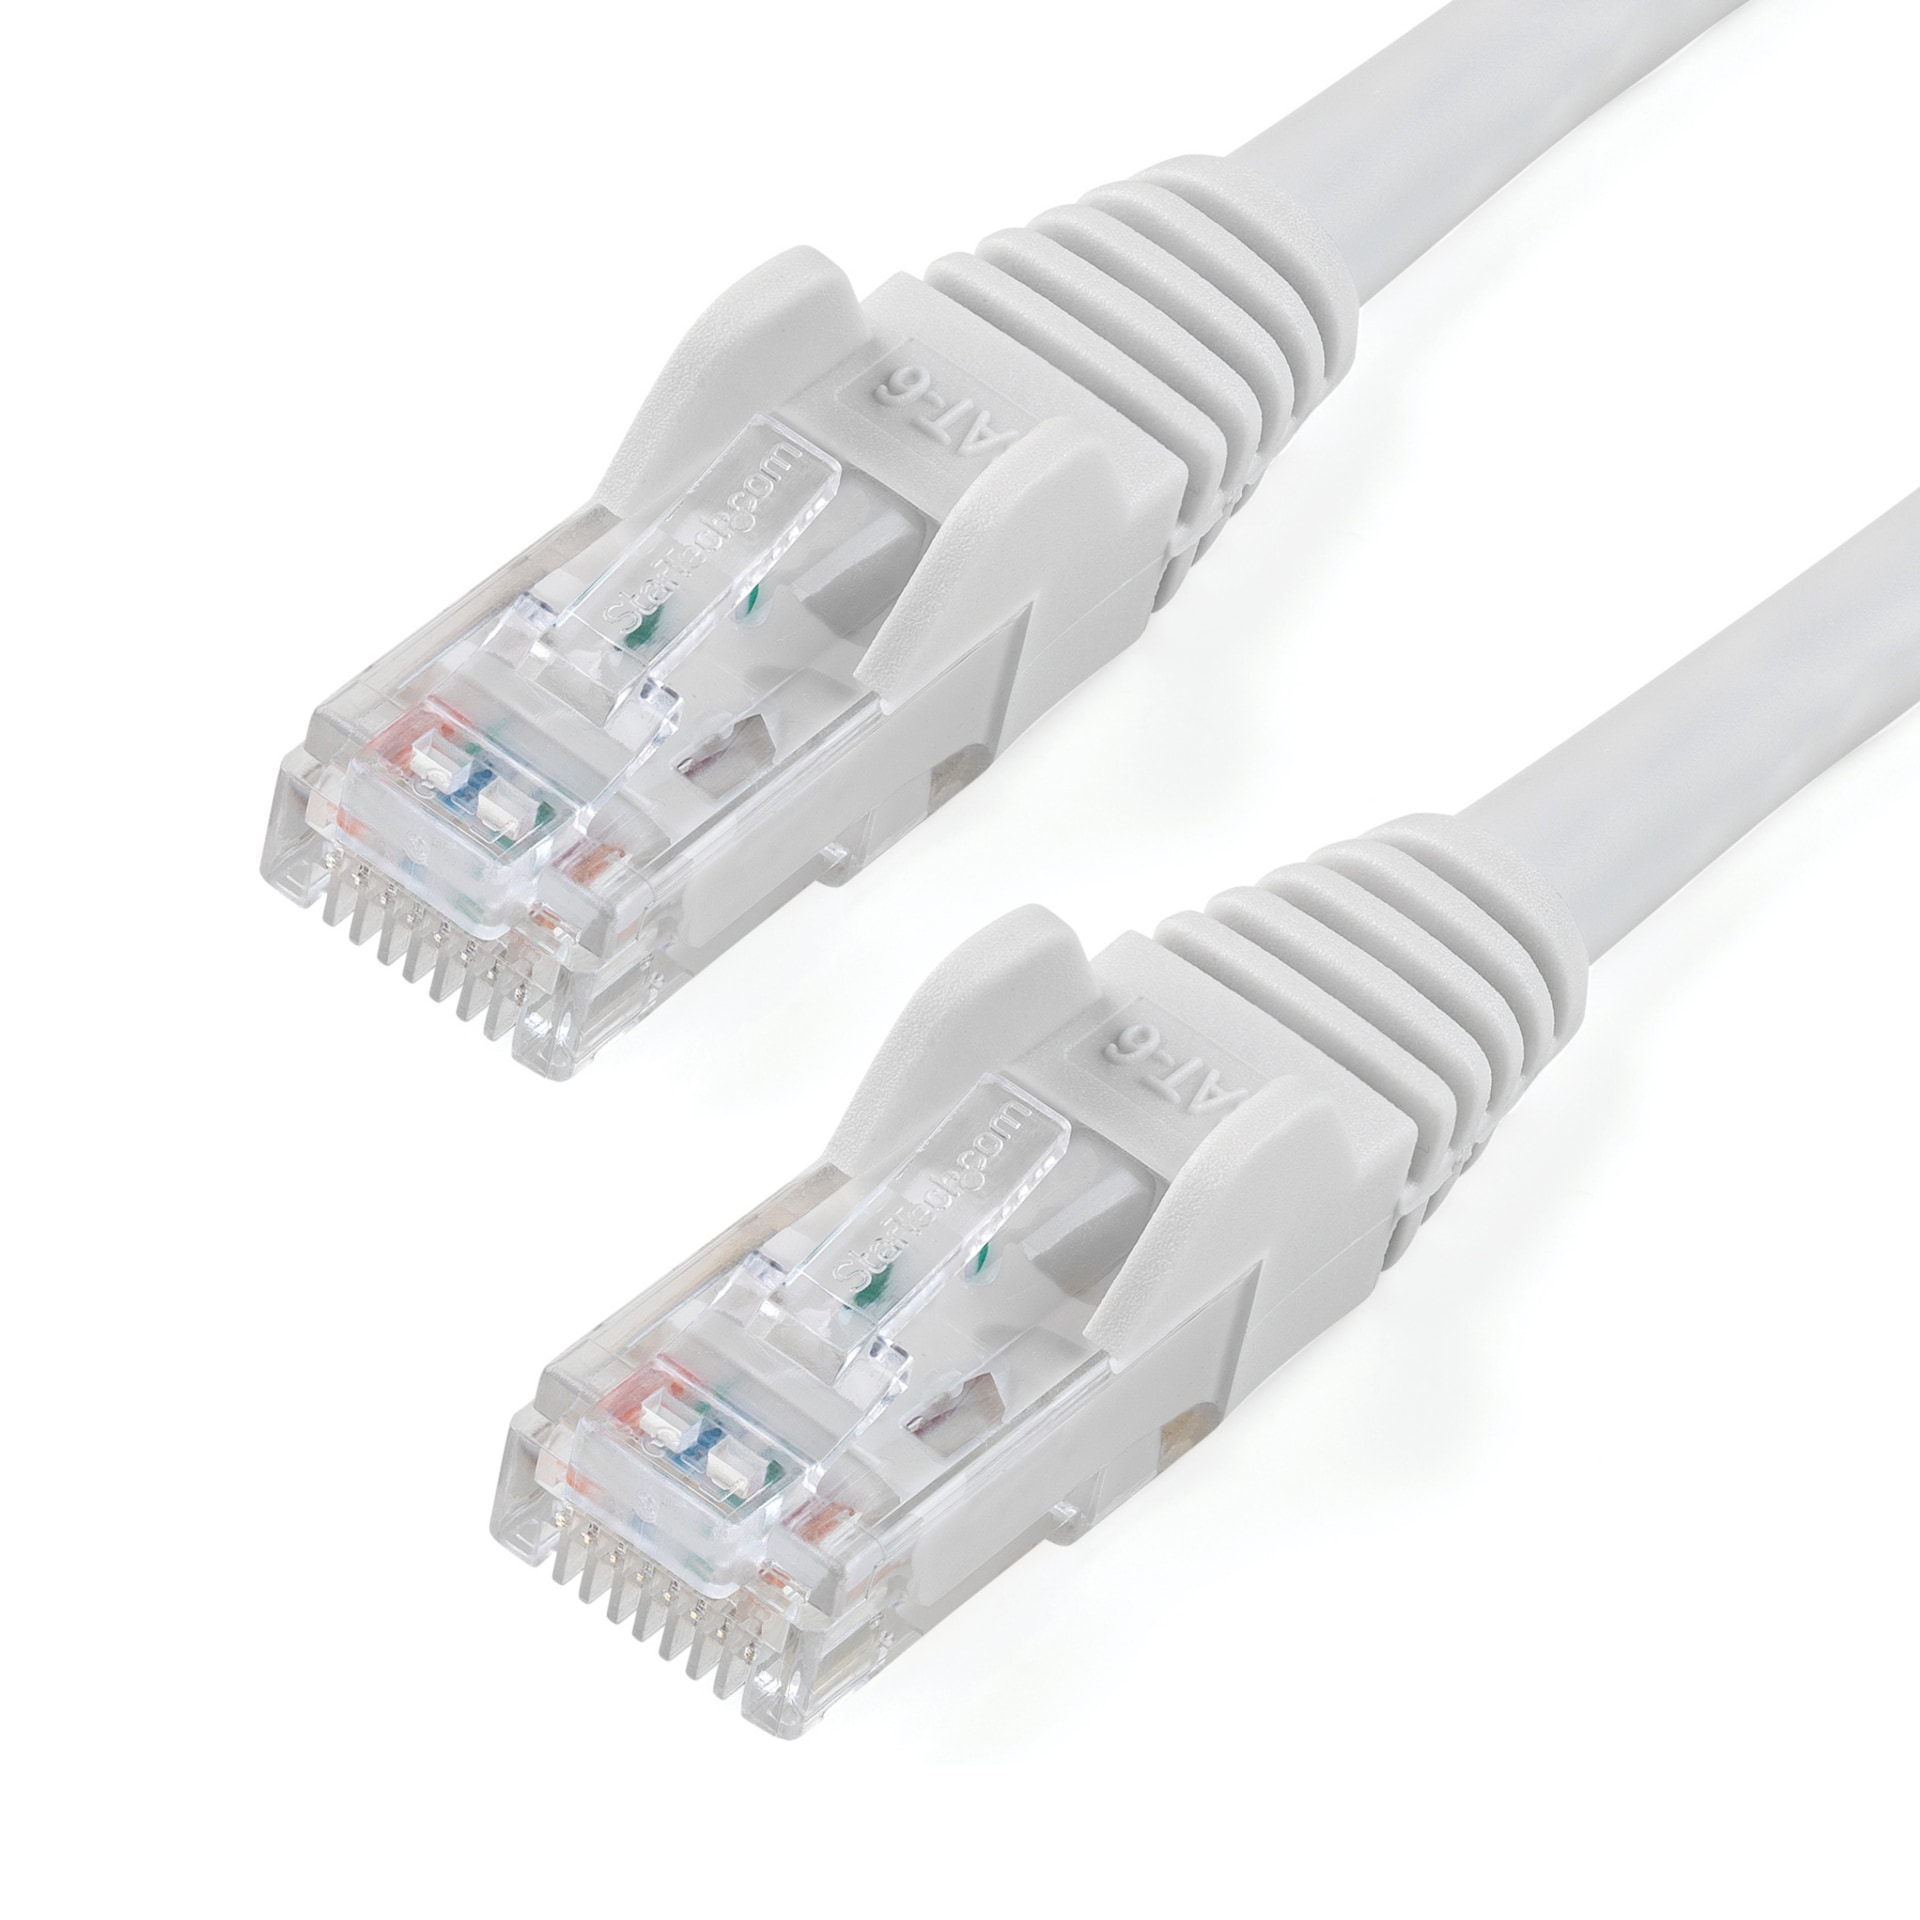 StarTech.com 5ft CAT6 Ethernet Cable - White Snagless Gigabit - 100W PoE UTP 650MHz Category 6 Patch Cord UL Certified